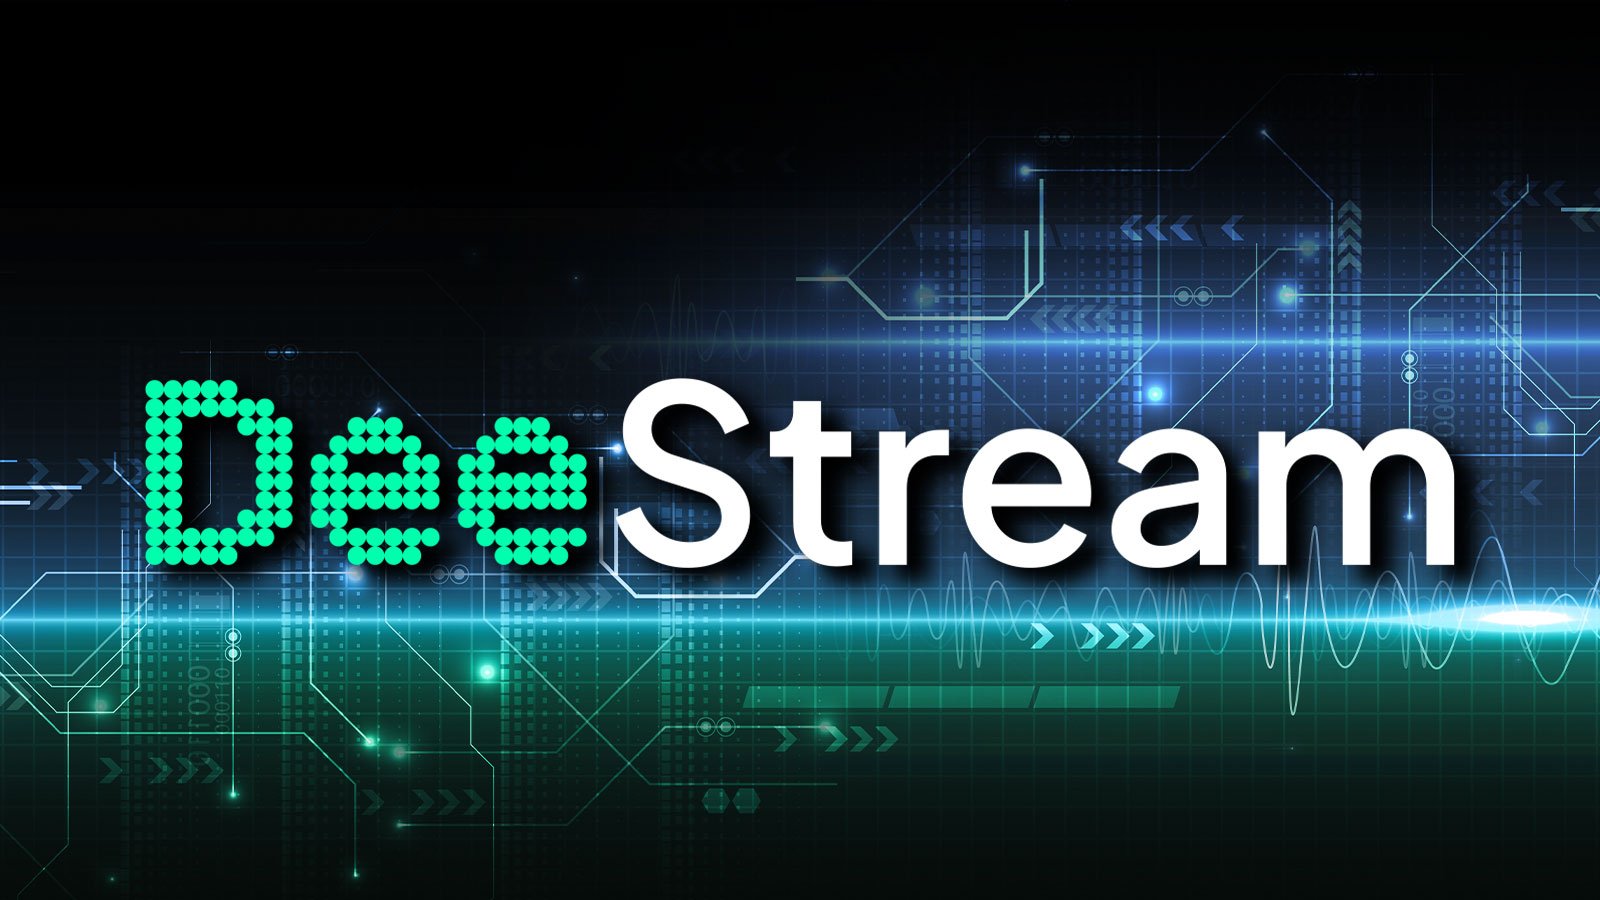 DeeStream (DST) Asset Release Campaign On-Boards Investors as Blur (BLUR), Cosmos (ATOM) Keep Surging